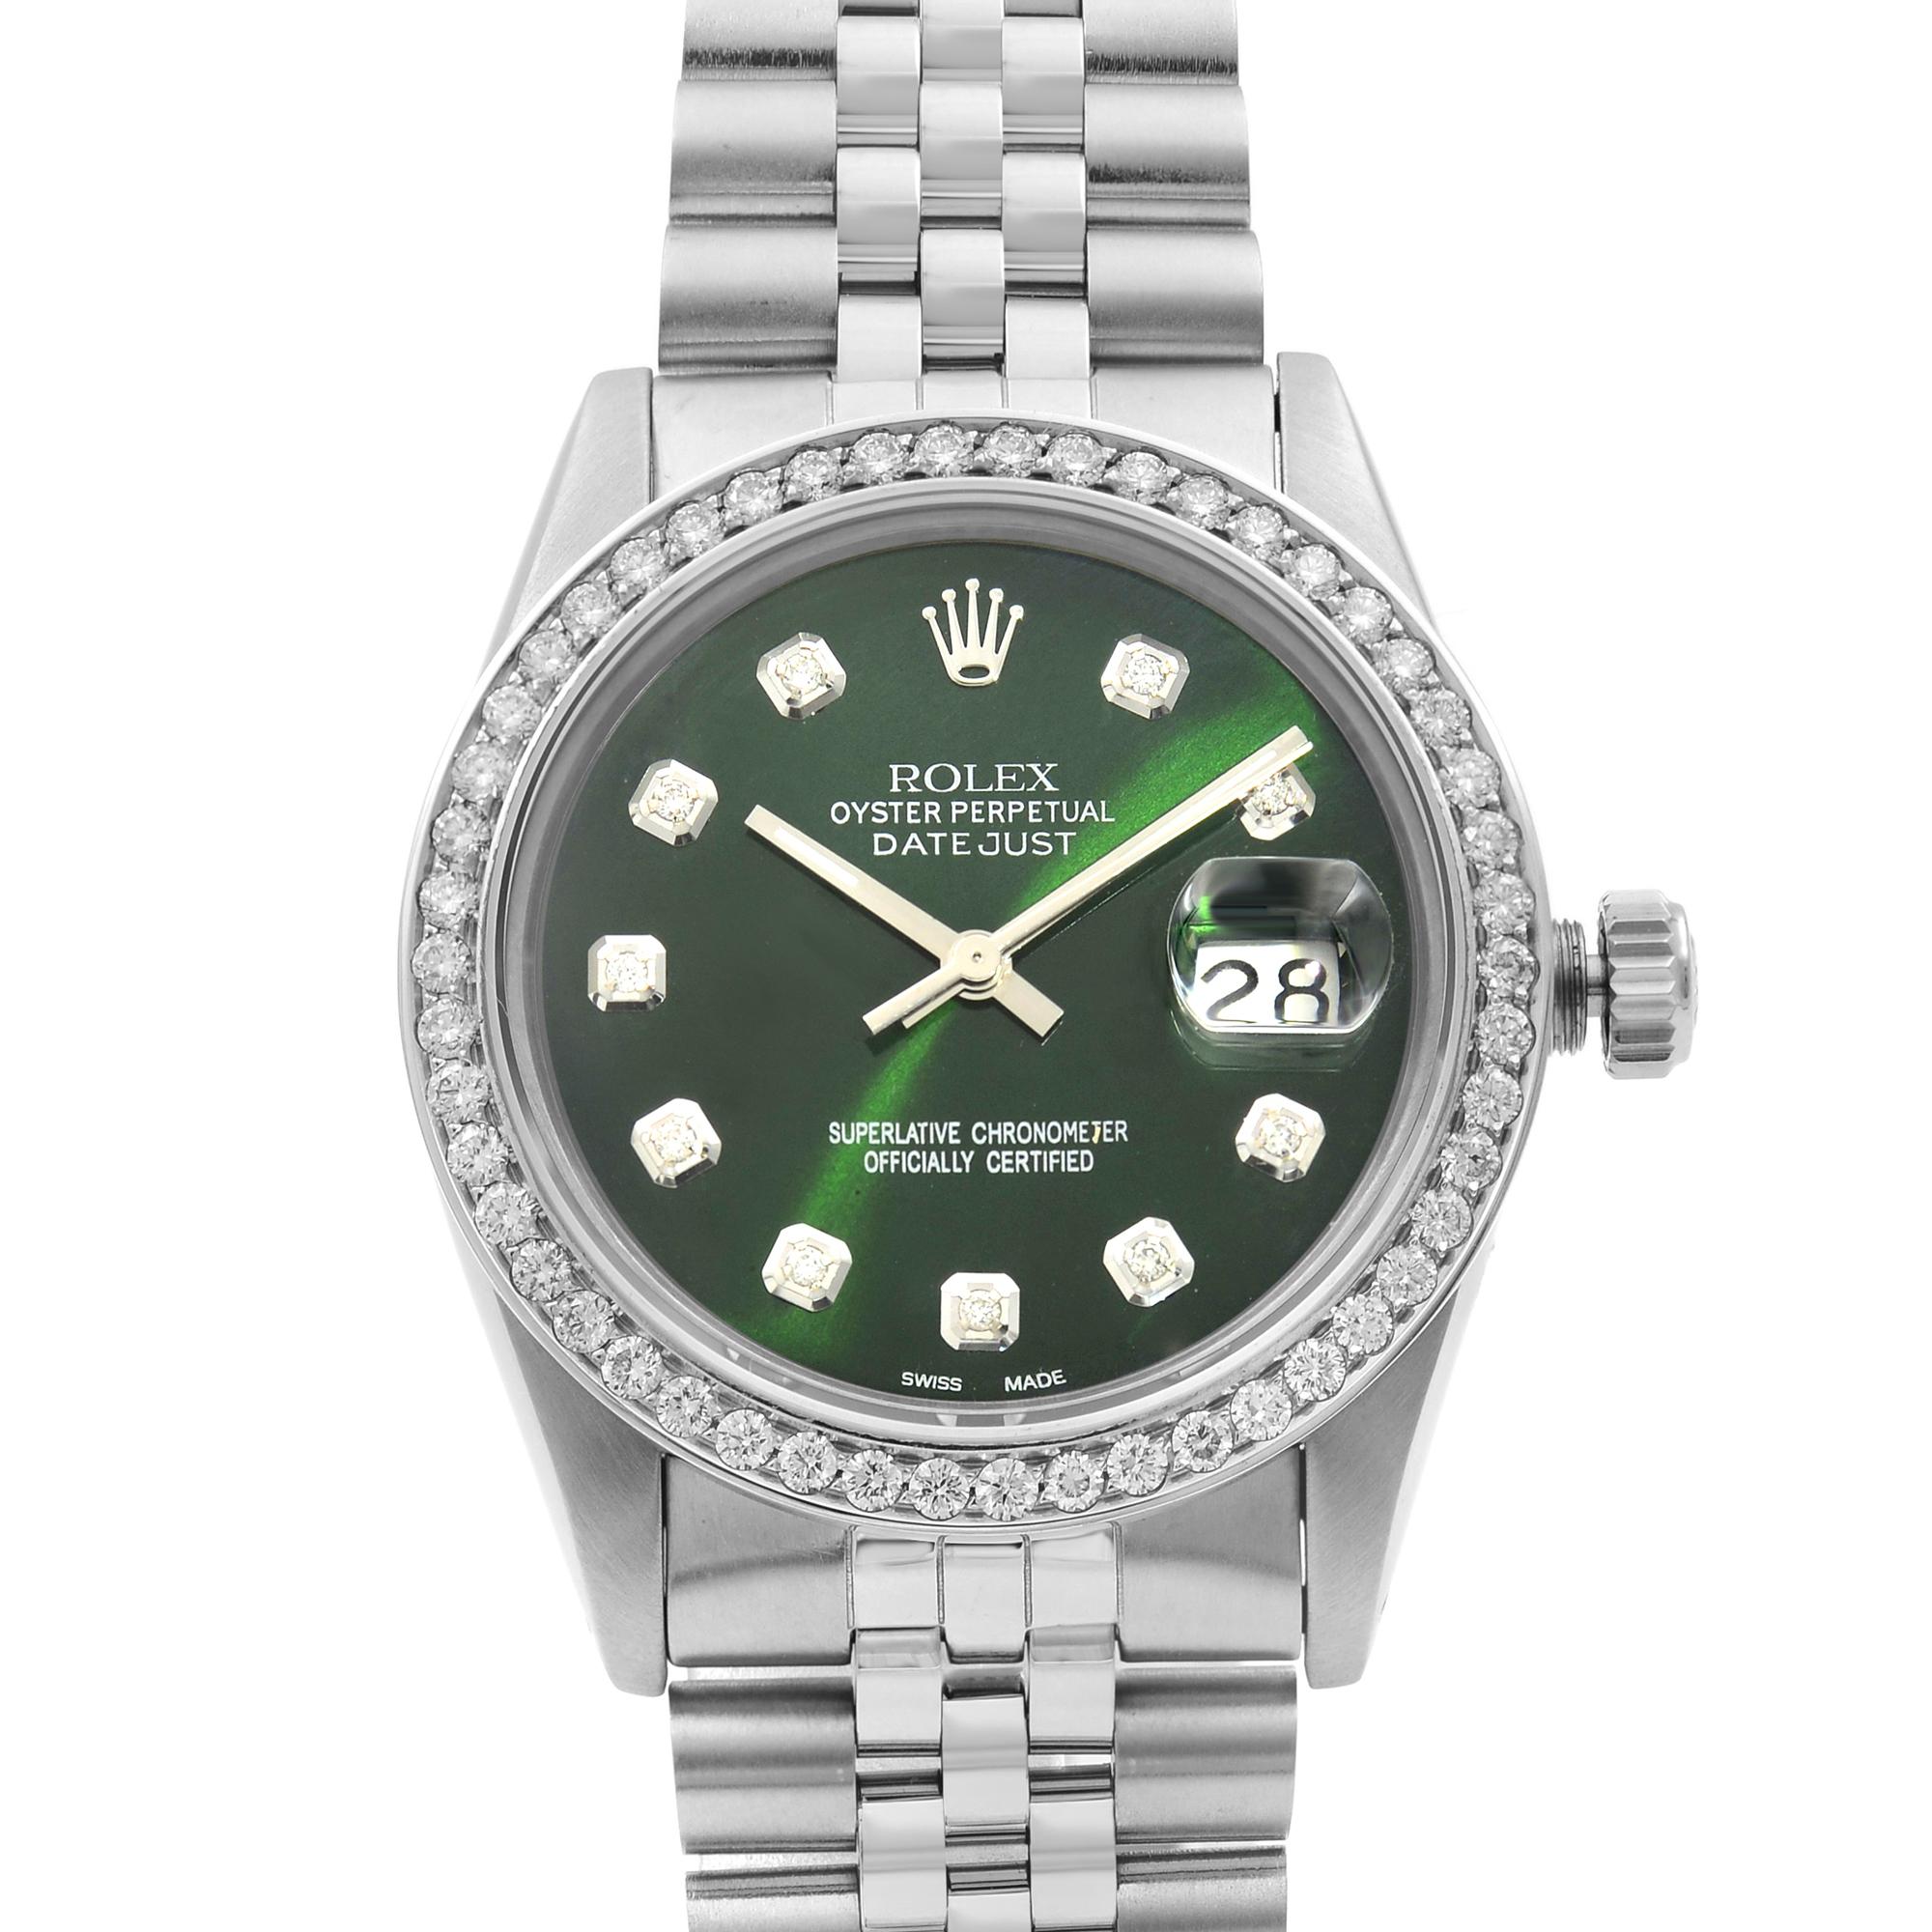 Pre-owned. 
1.0 Cttw Custom Diamond Bezel and 0.20 Cttw Custom Green Diamond Dial. The original Box and Papers are not included. Comes with a Chronostore presentation box and an authenticity card. Covered by a three-year Chronostore